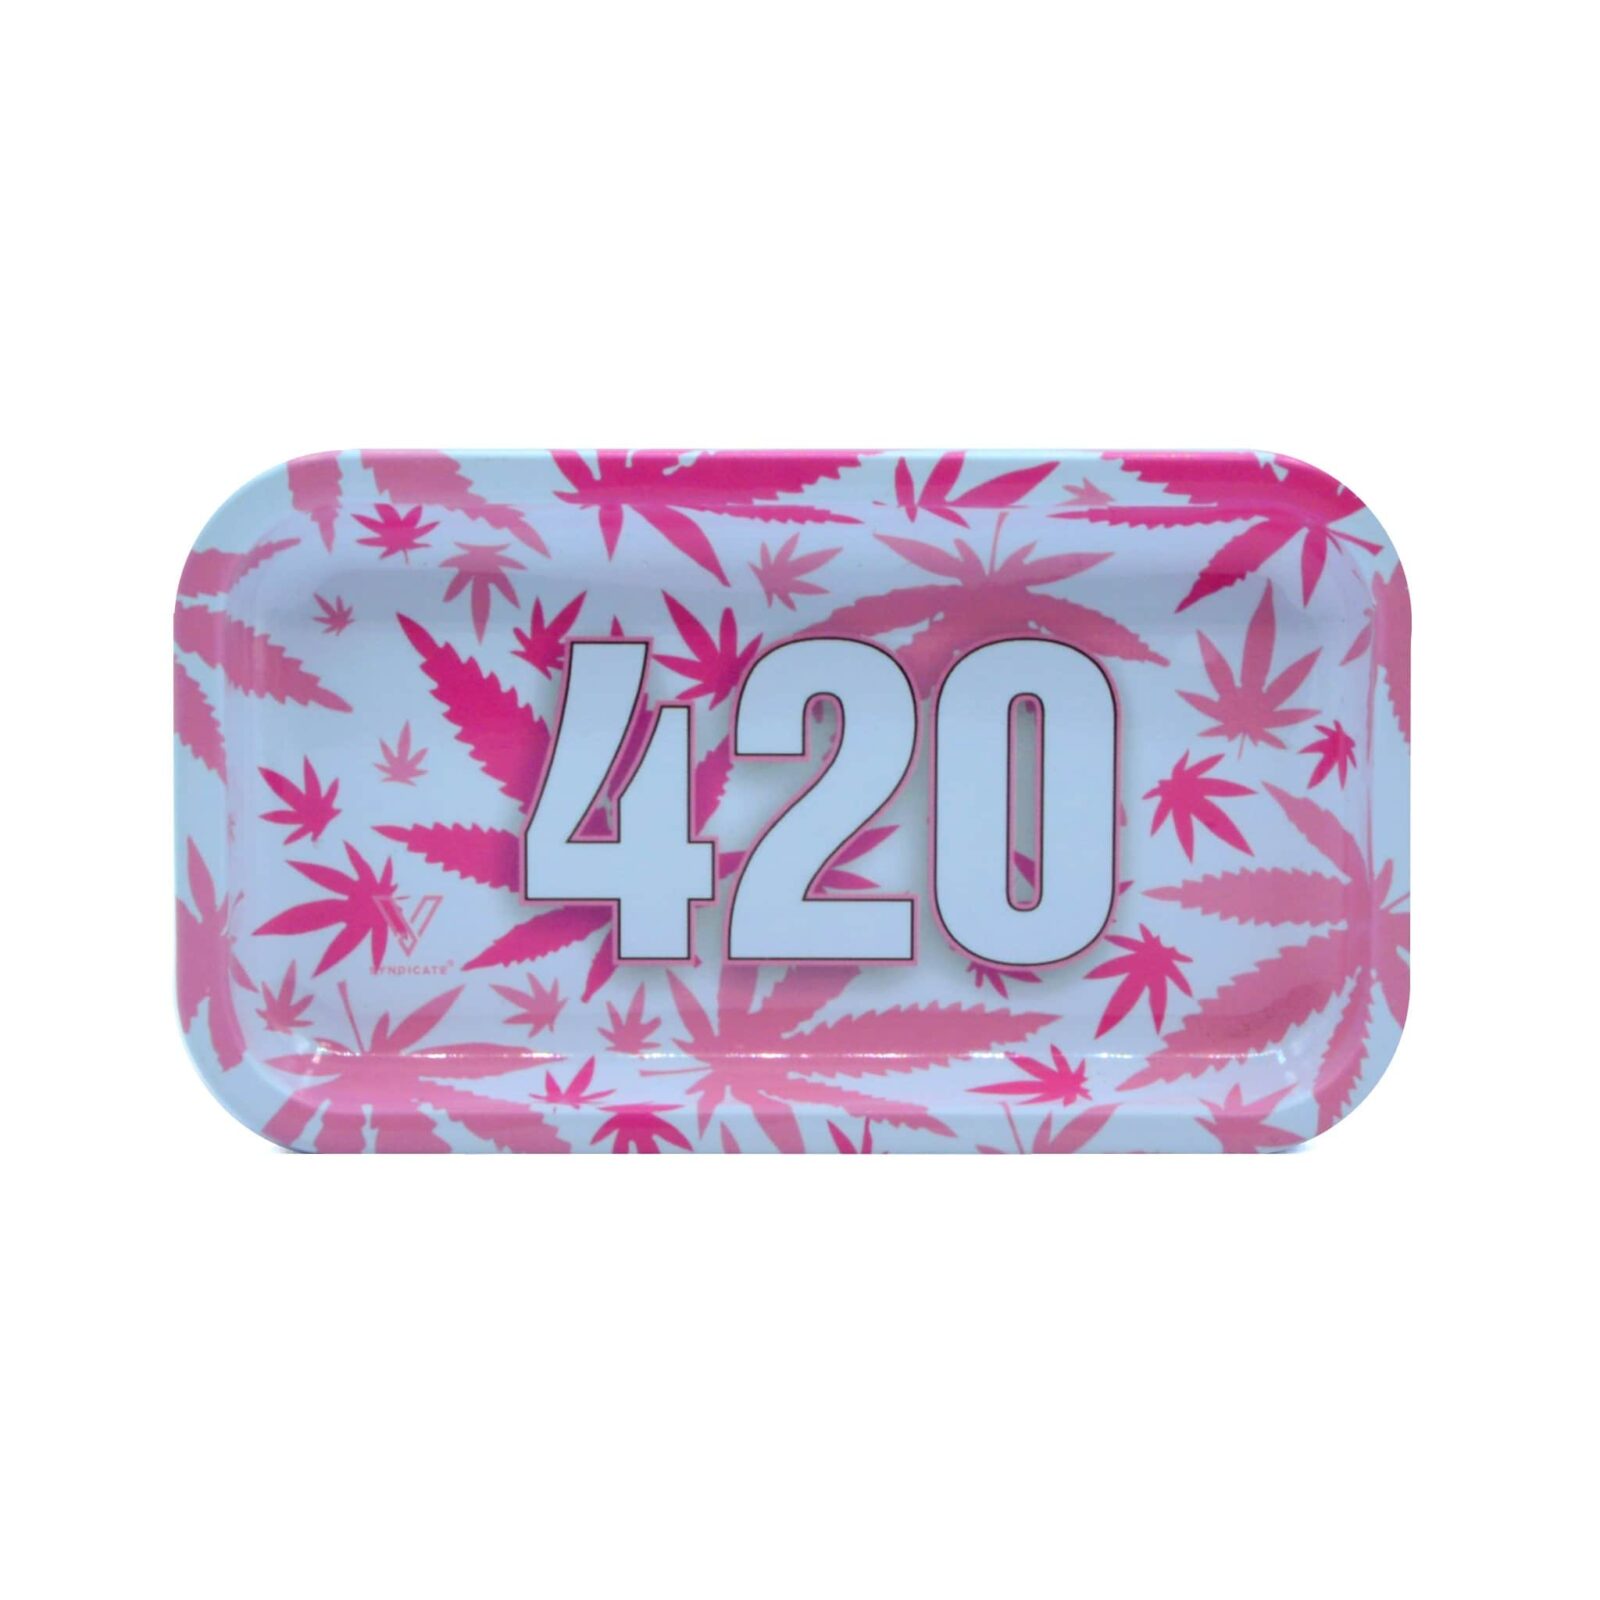 v syndicate pink 420 graphic rectangle rolling box close